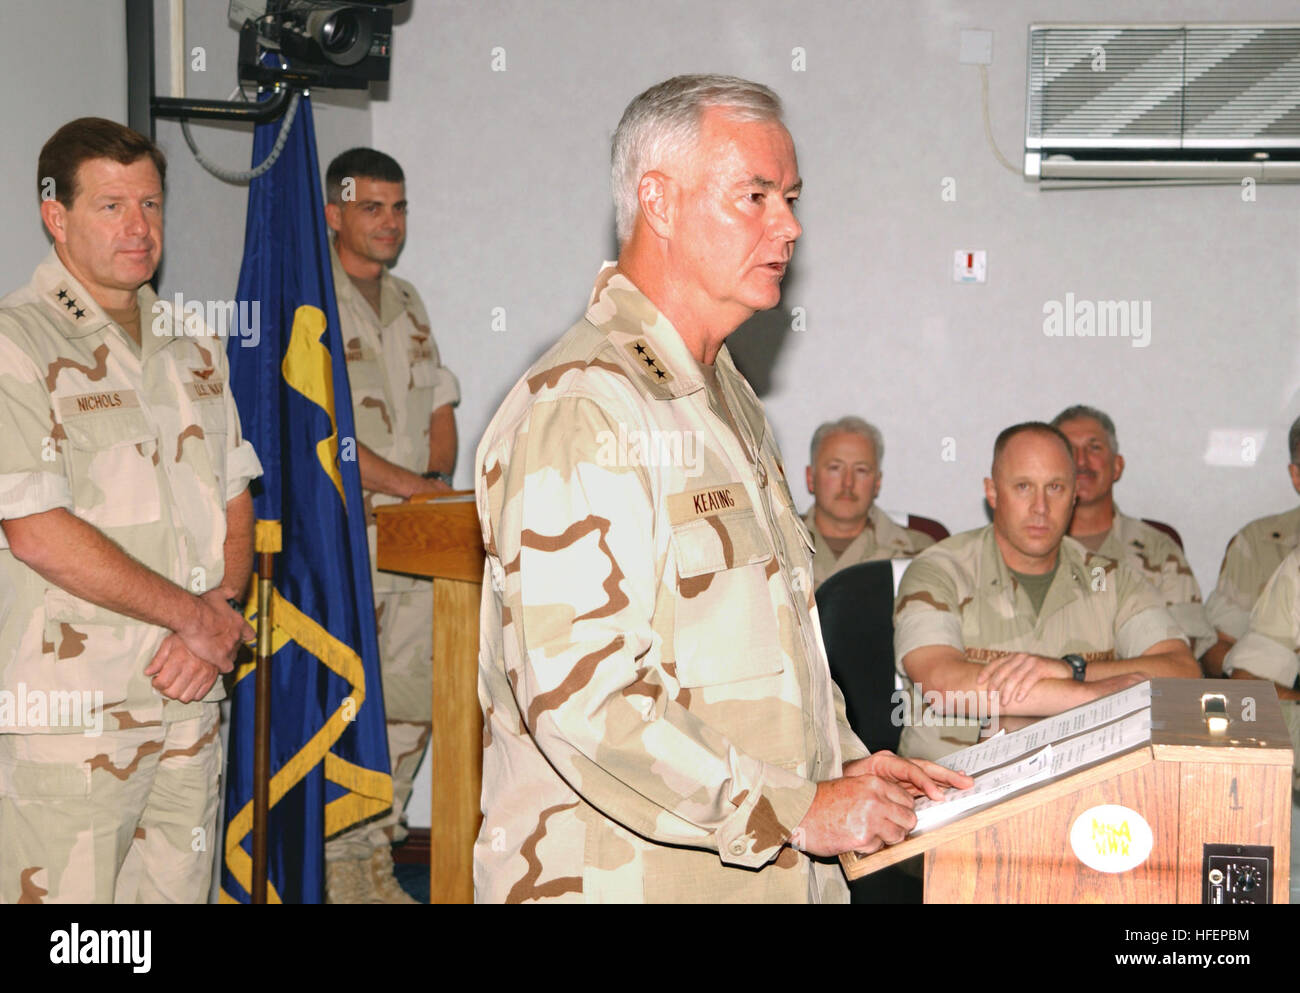 031007-N-7573H-005  Manama, Bahrain (Oct. 7, 2003) - Outgoing Commander U.S. Naval Forces Central Command/ Commander, Fifth Fleet Vice Adm. Timothy J. Keating speaks with guest gathered for a change of command ceremony at Fifth Fleet Headquarters in Bahrain.  Vice Adm. David C. Nichols, Jr. relieved Keating, who led Fifth Fleet Sailors and Marines for the past 20 months during Operations Enduring Freedom and Iraqi Freedom.  U.S. Navy photo by Photographer's Mate 1st Class Ernest Hunt.  (RELEASED) US Navy 031007-N-7573H-005 Outgoing Commander U.S. Naval Forces Central Command- Commander, Fifth  Stock Photo